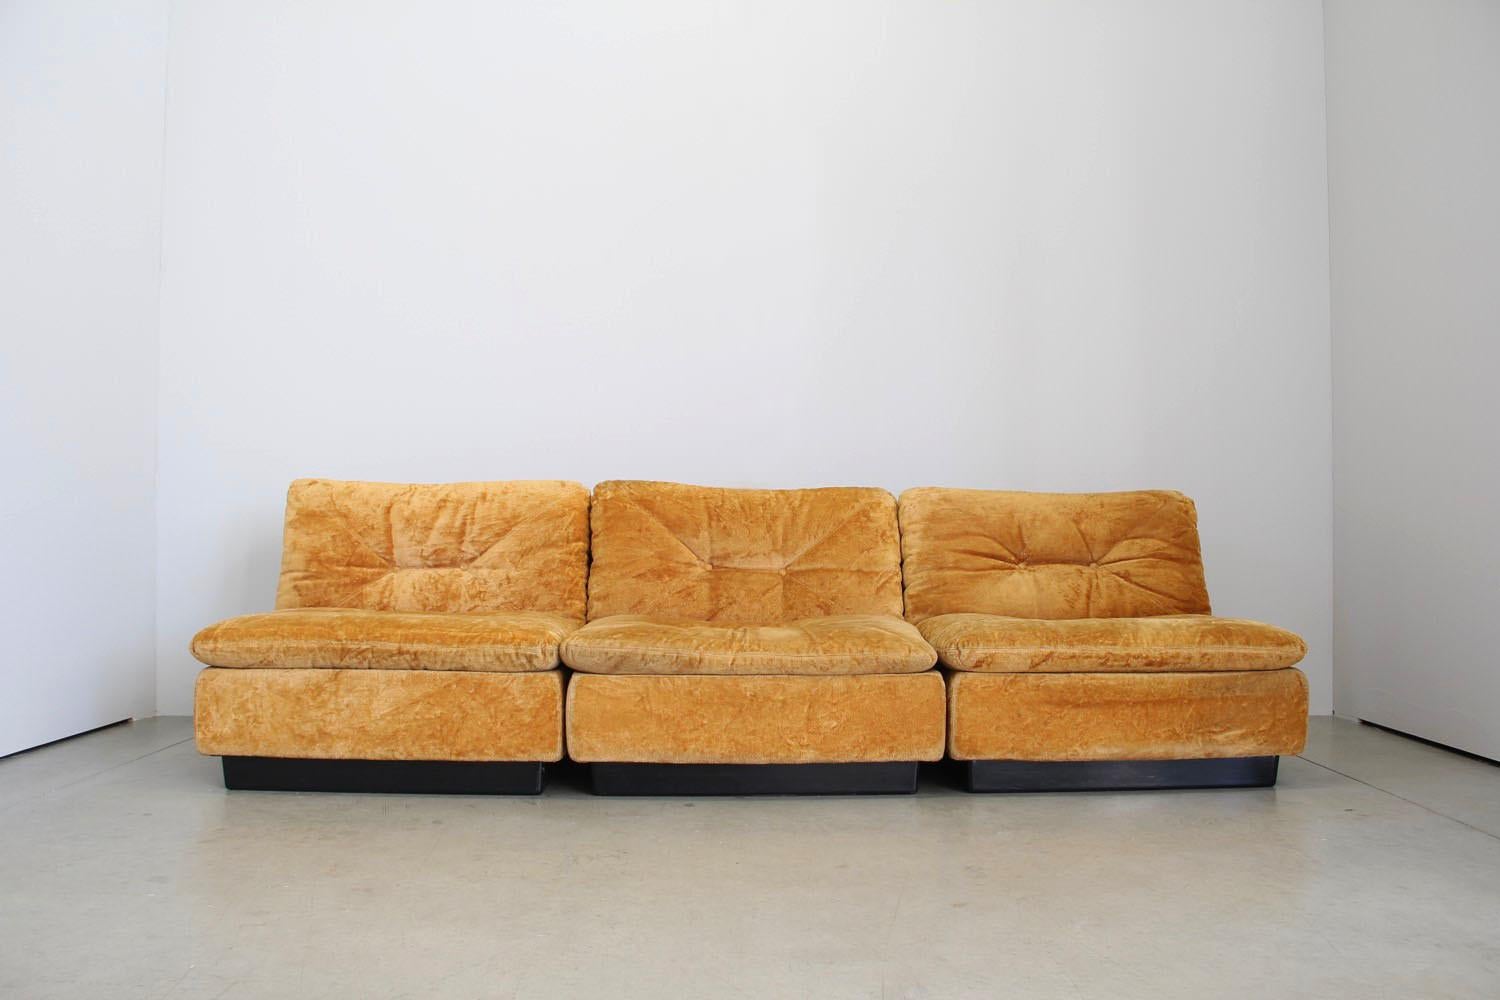 1970's couch